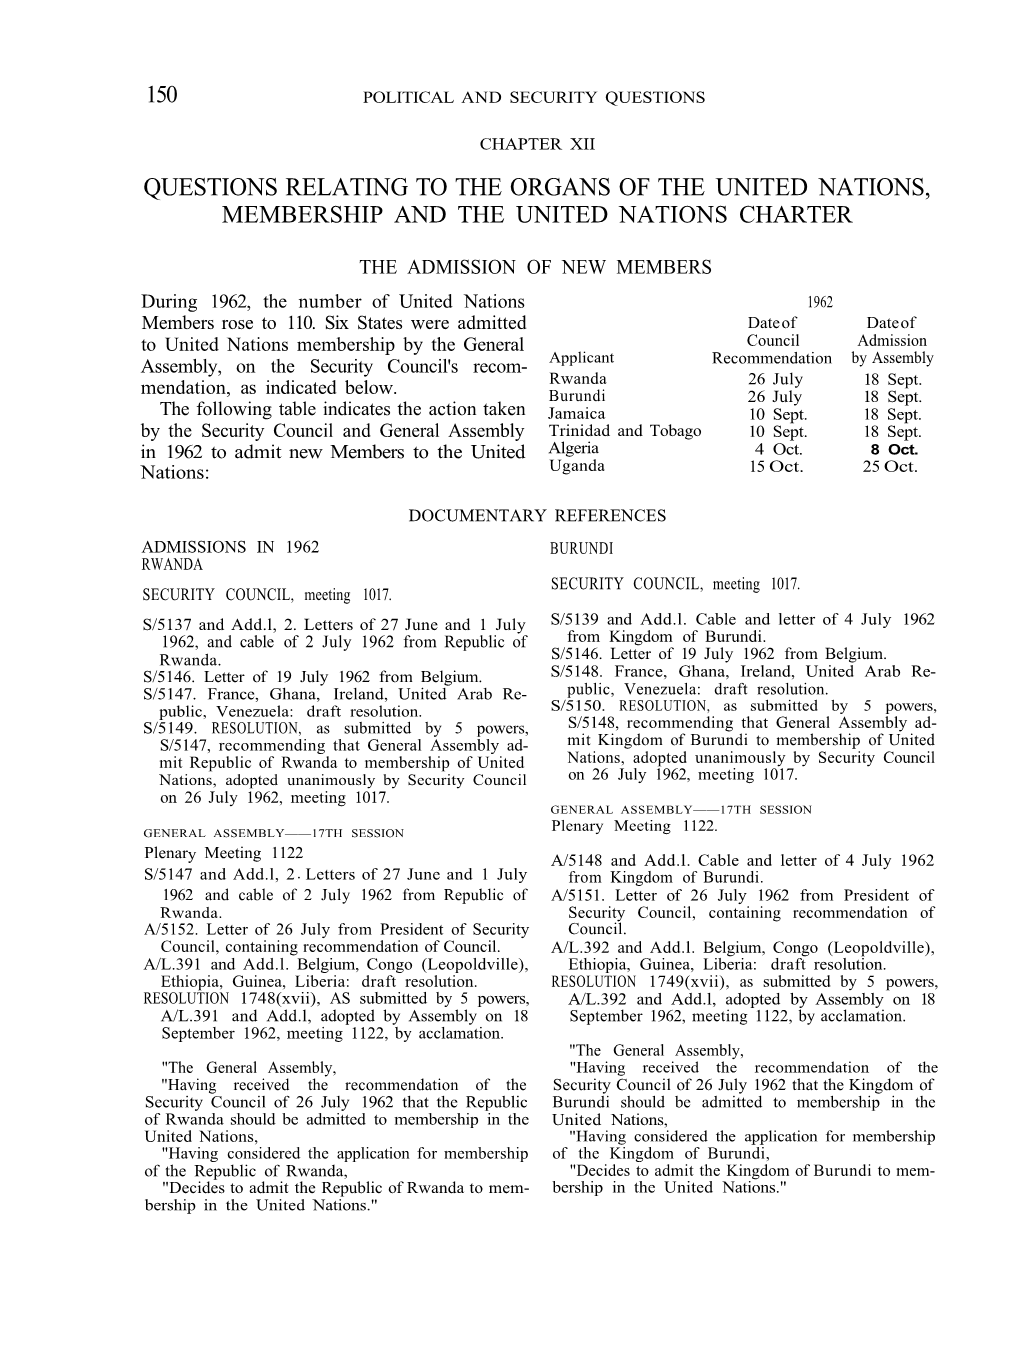 [ 1962 ] Part 1 Sec 1 Chapter 12 Questions Relating to the Organs of the United Nations, Membership and the United Nations Chart